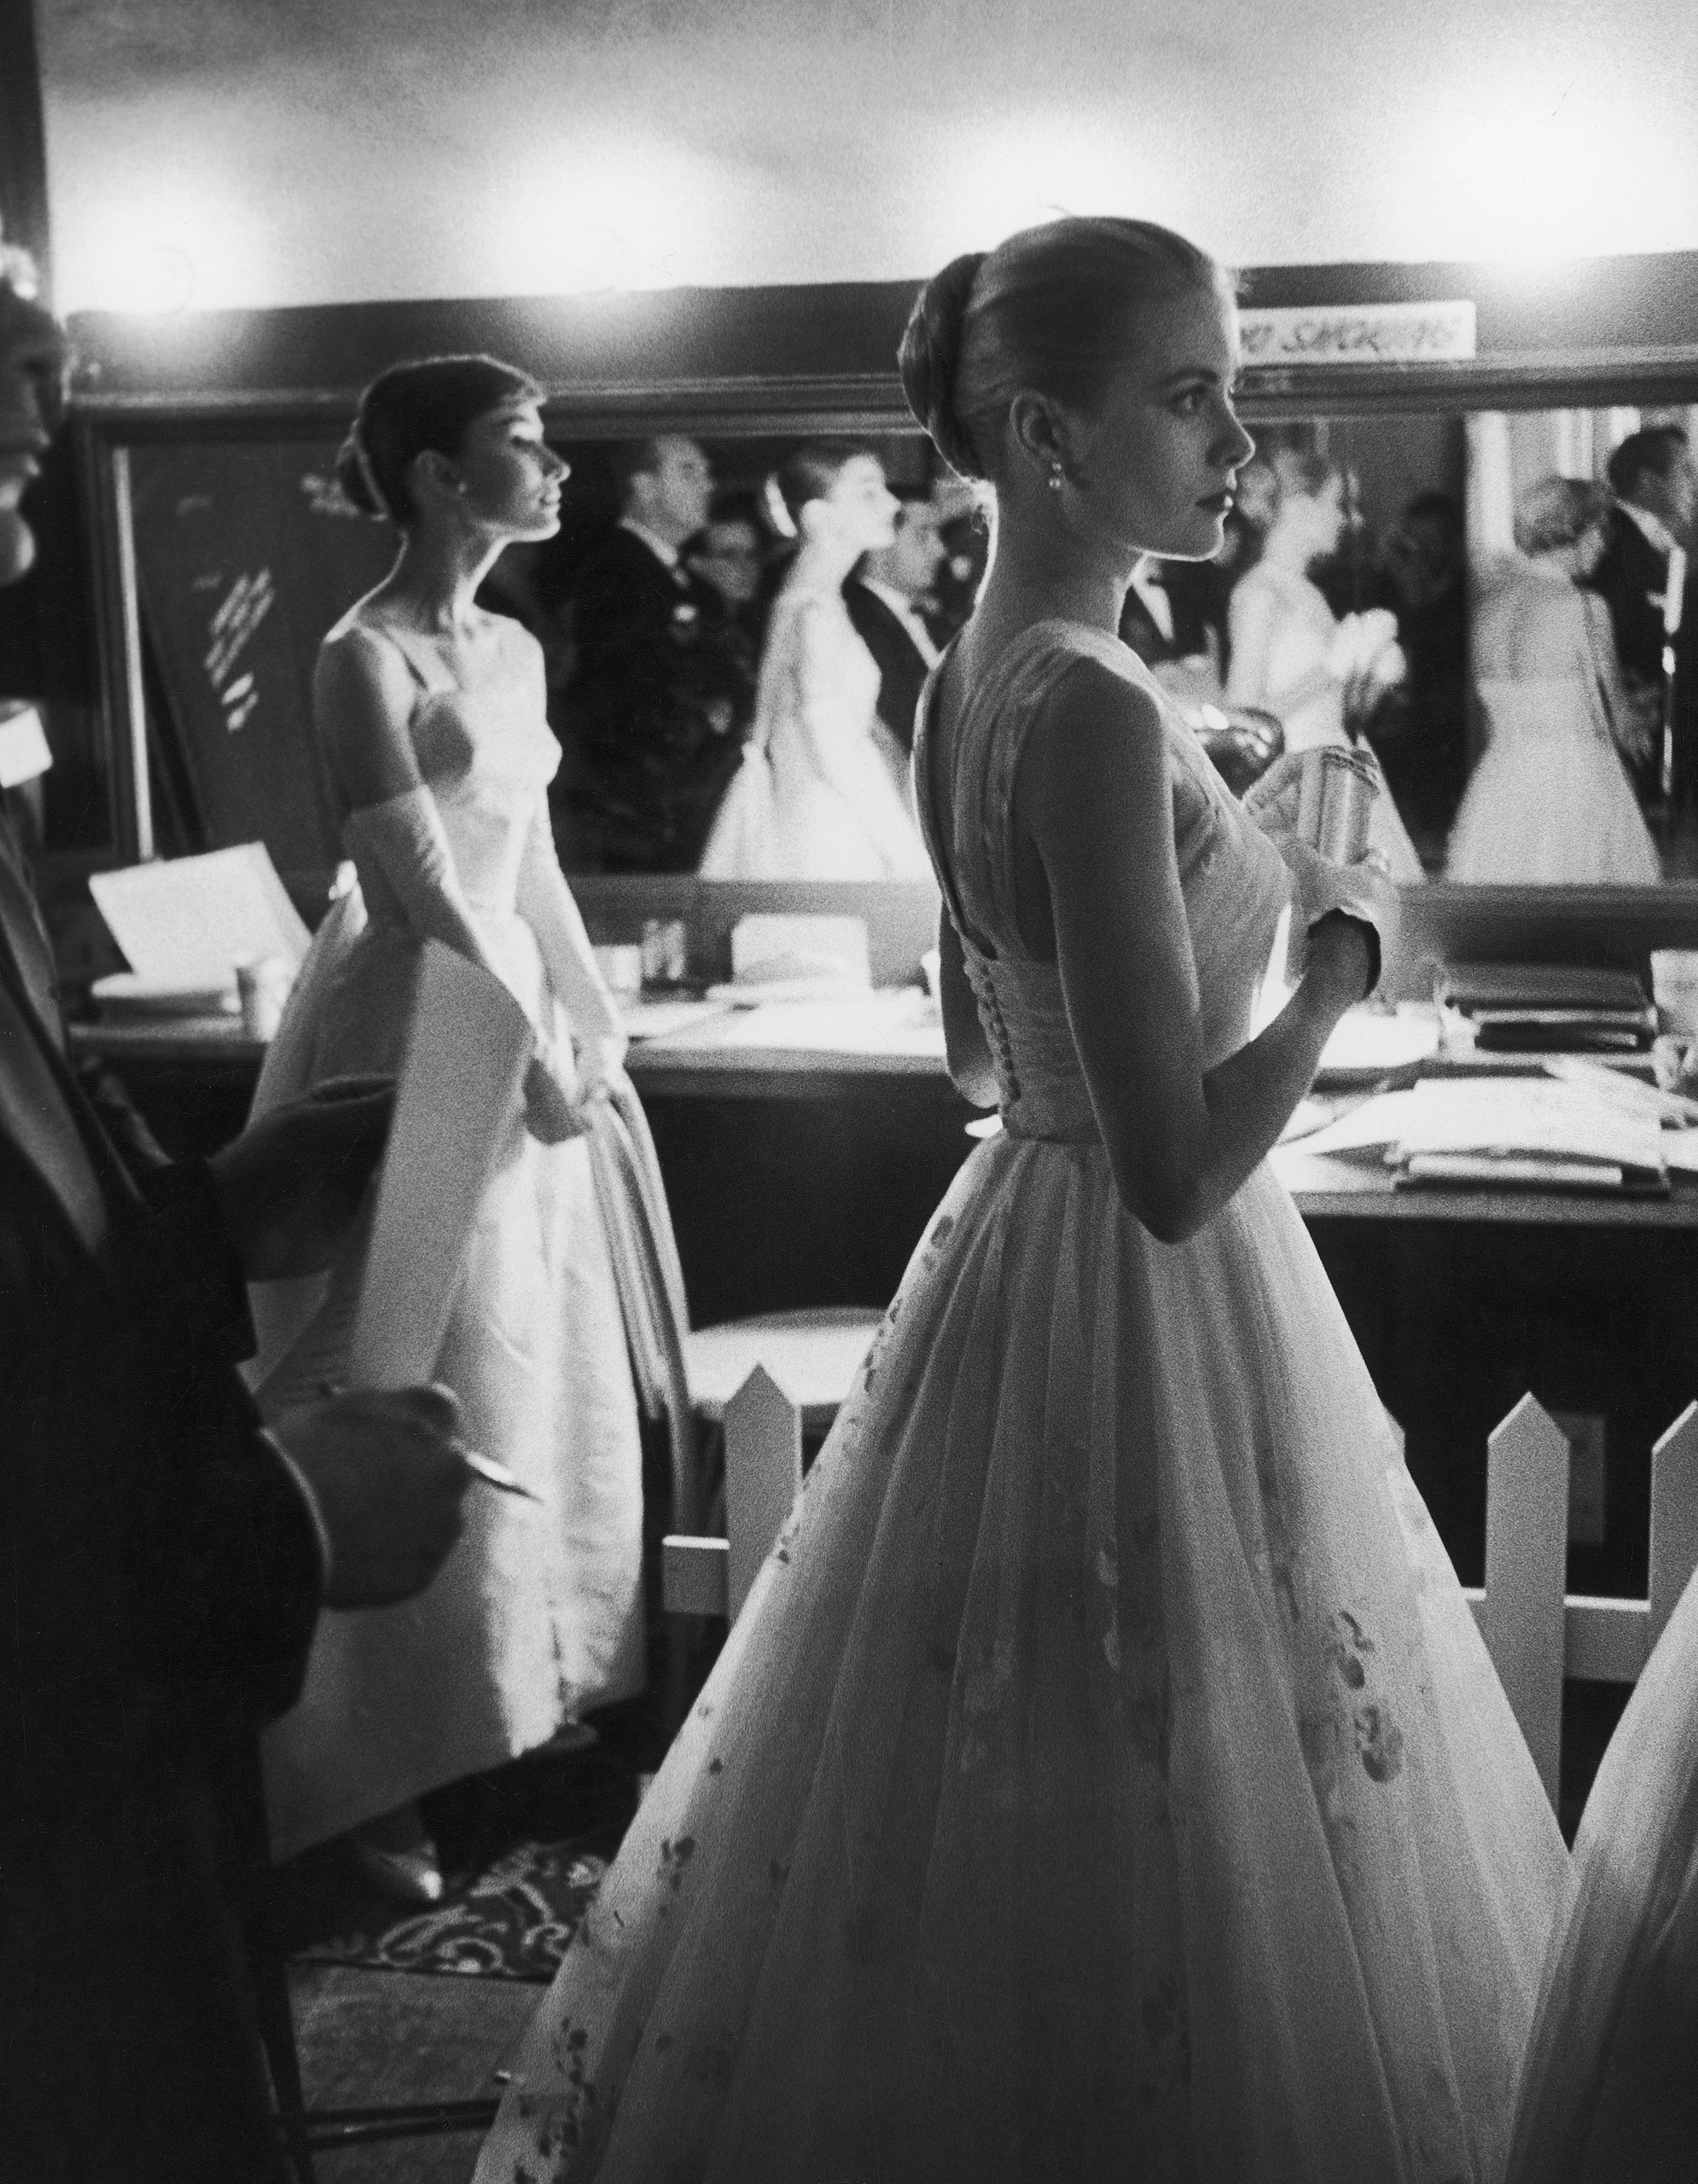 Audrey Hepburn and Grace Kelly wait backstage at the RKO Pantages Theatre during the 28th Annual Academy Awards, 1956.